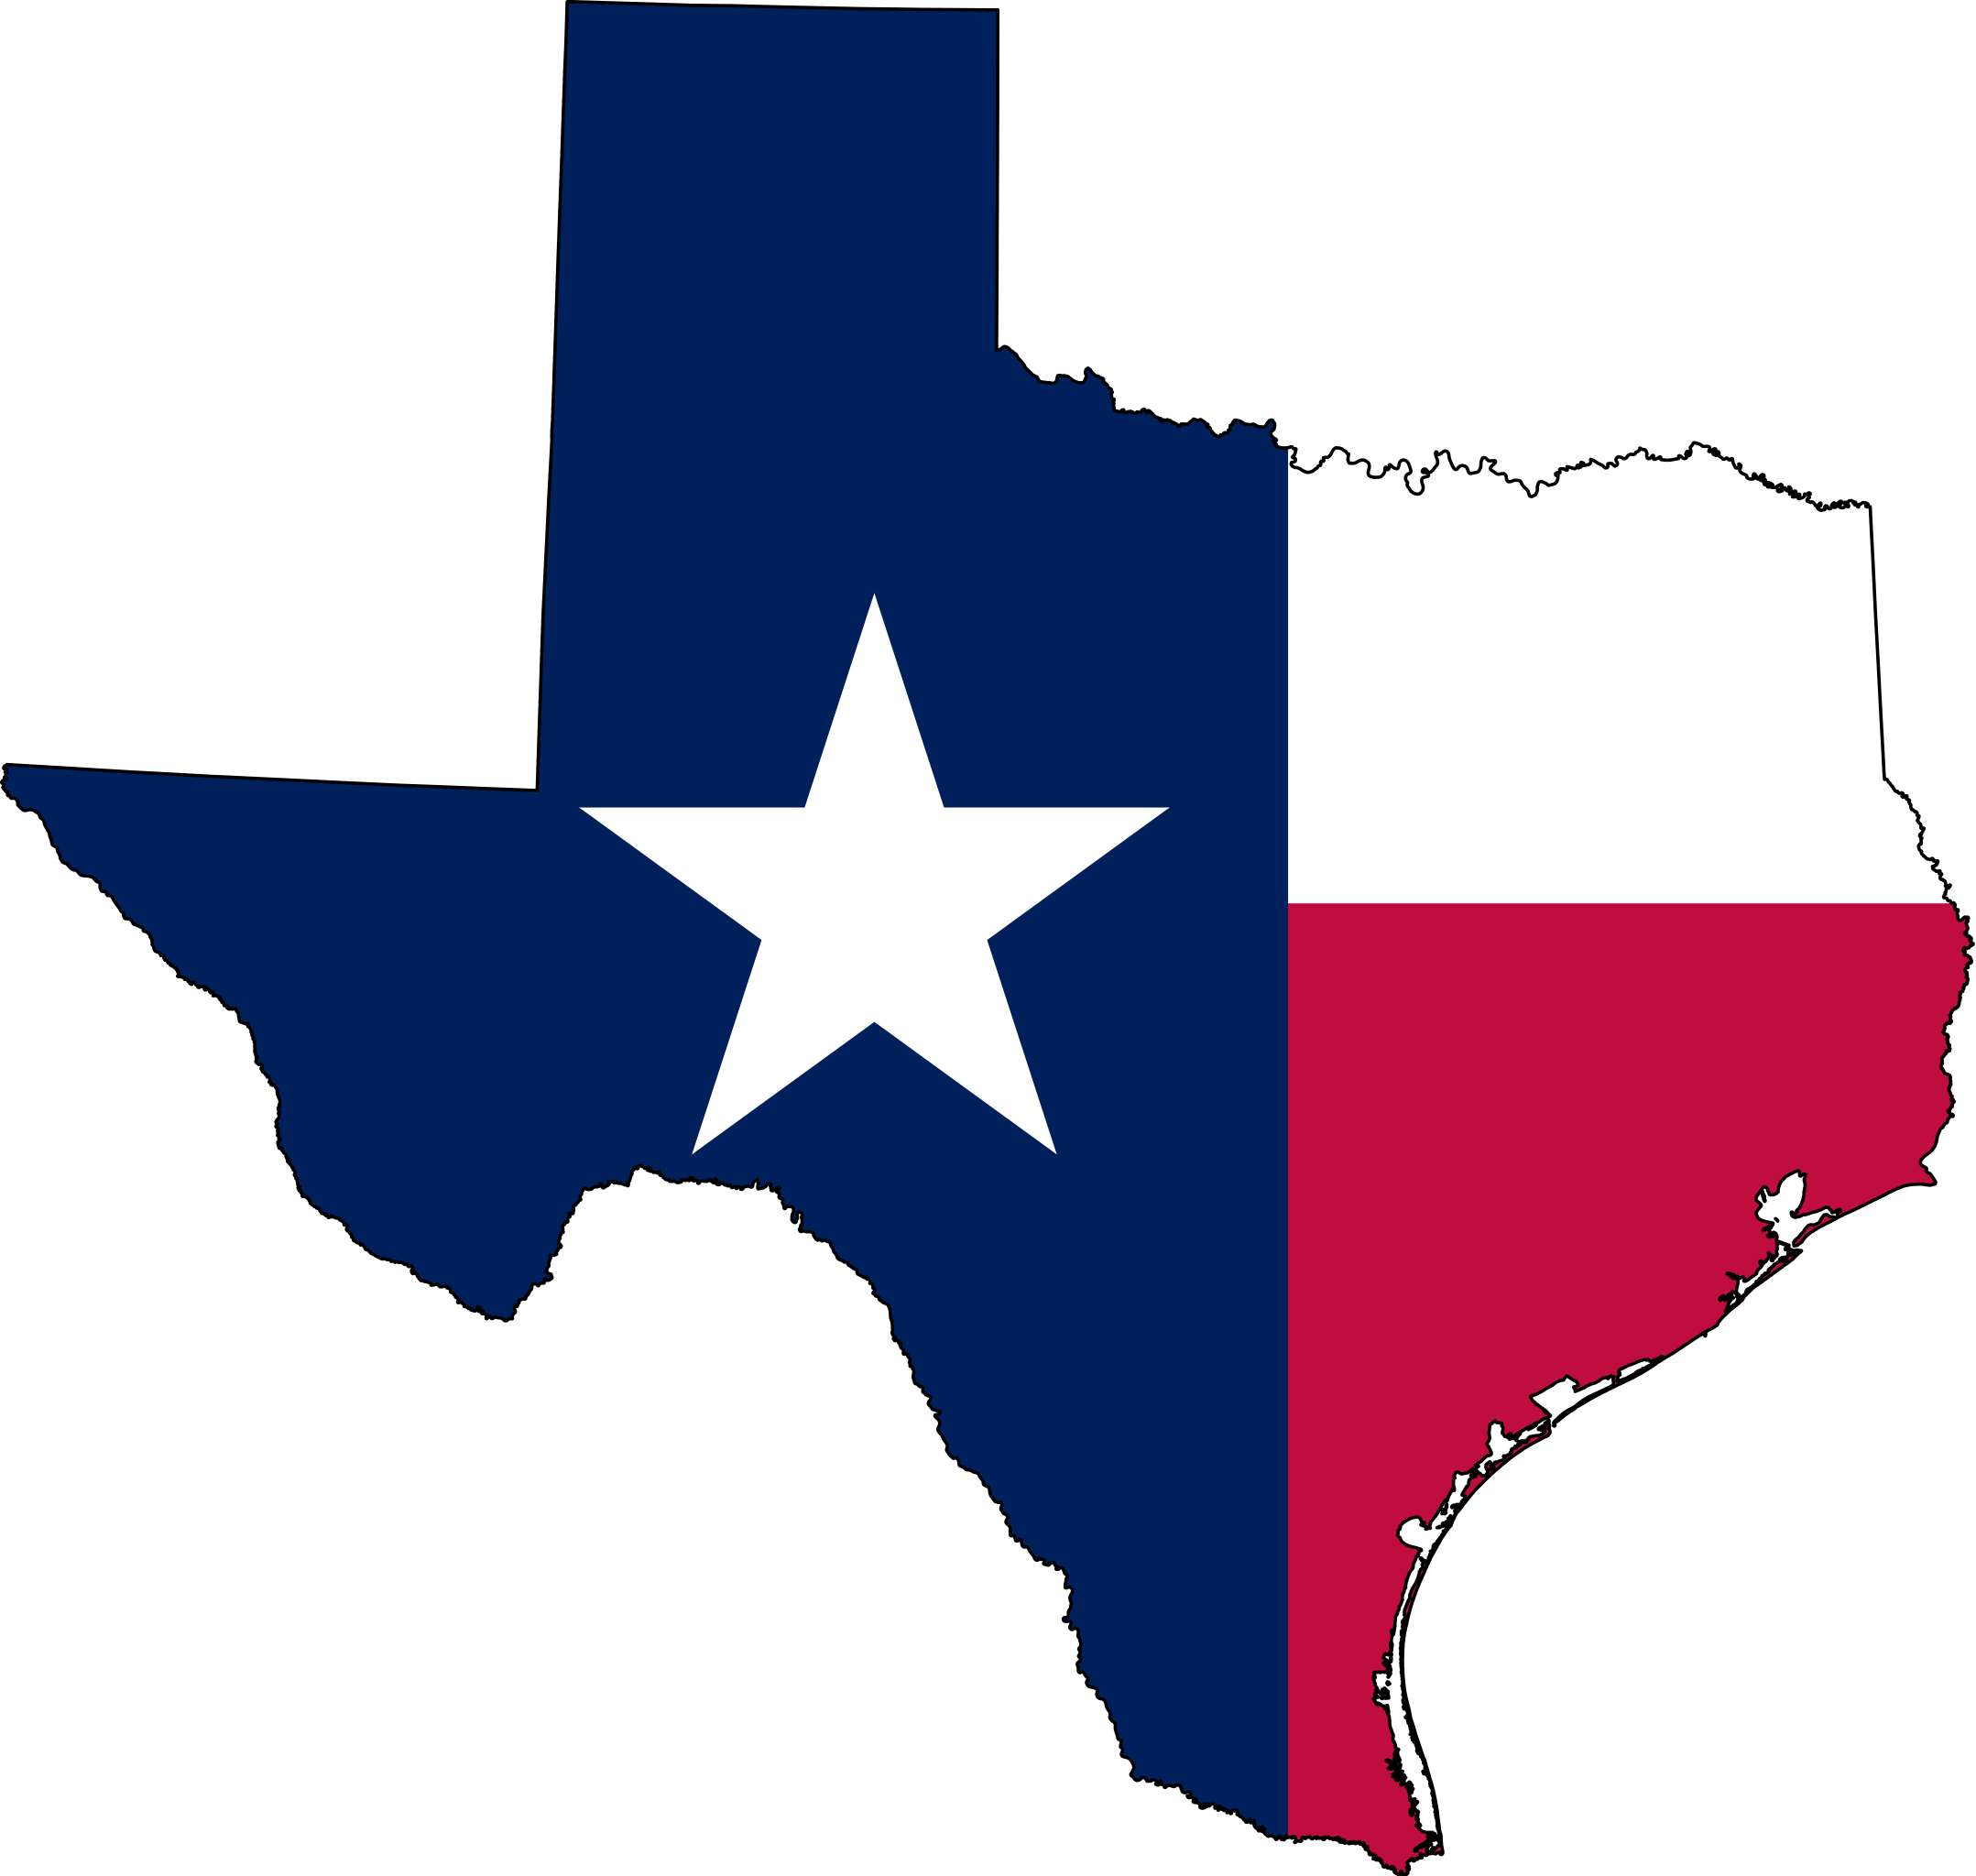 Texas shape filled in with state flag